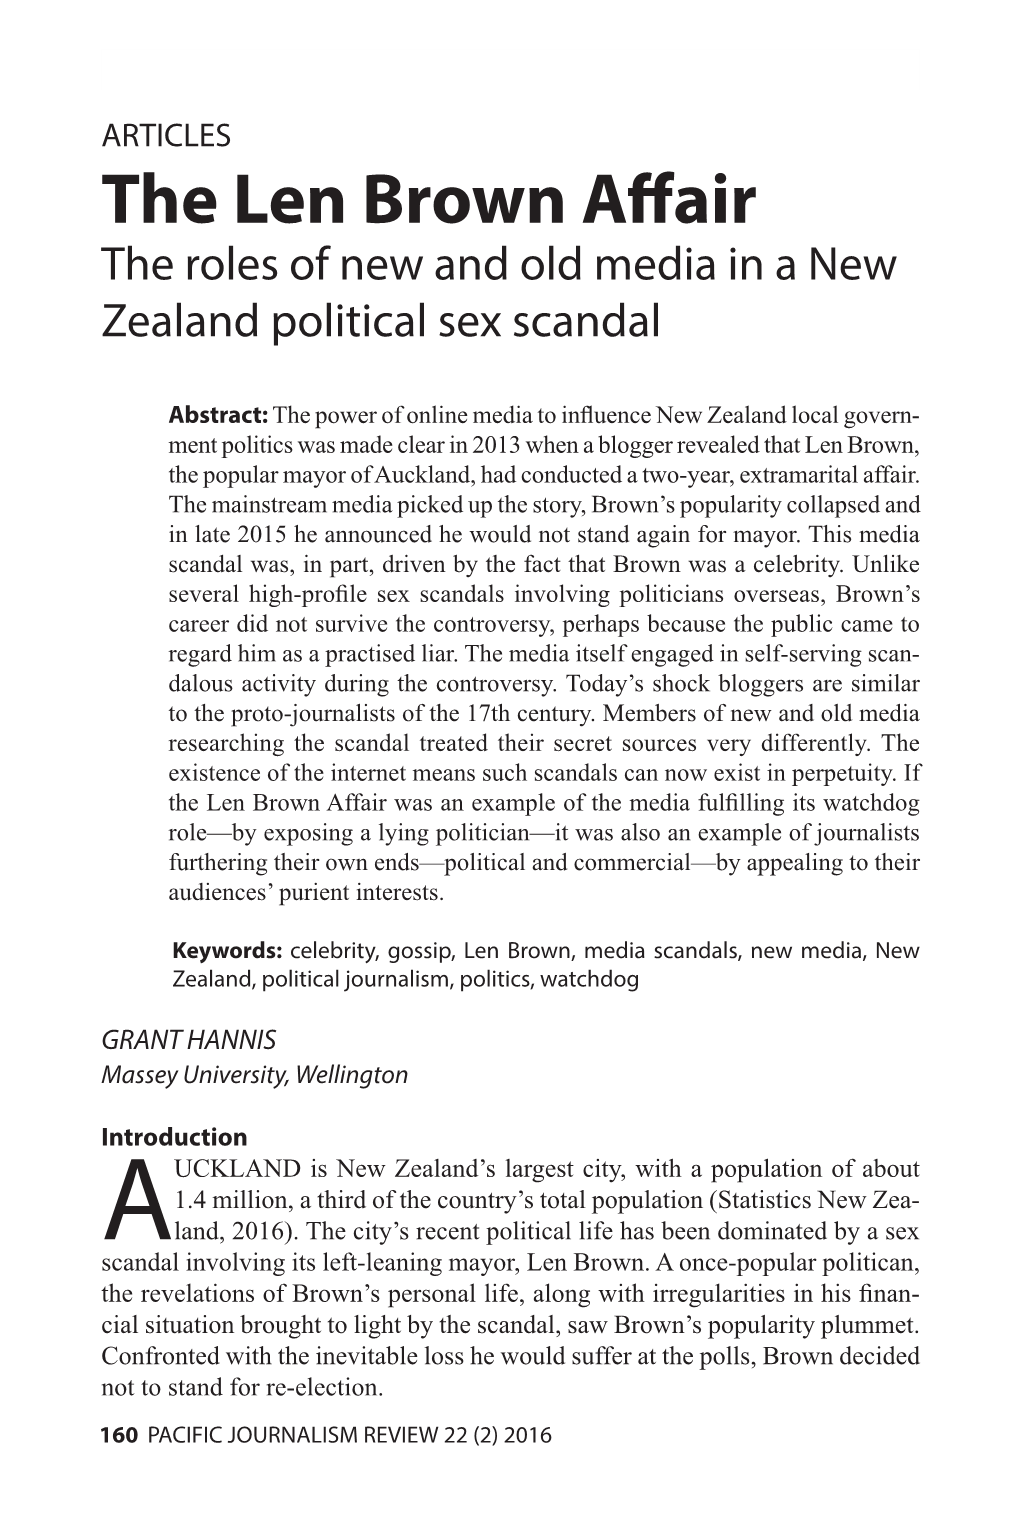 The Len Brown Affair the Roles of New and Old Media in a New Zealand Political Sex Scandal